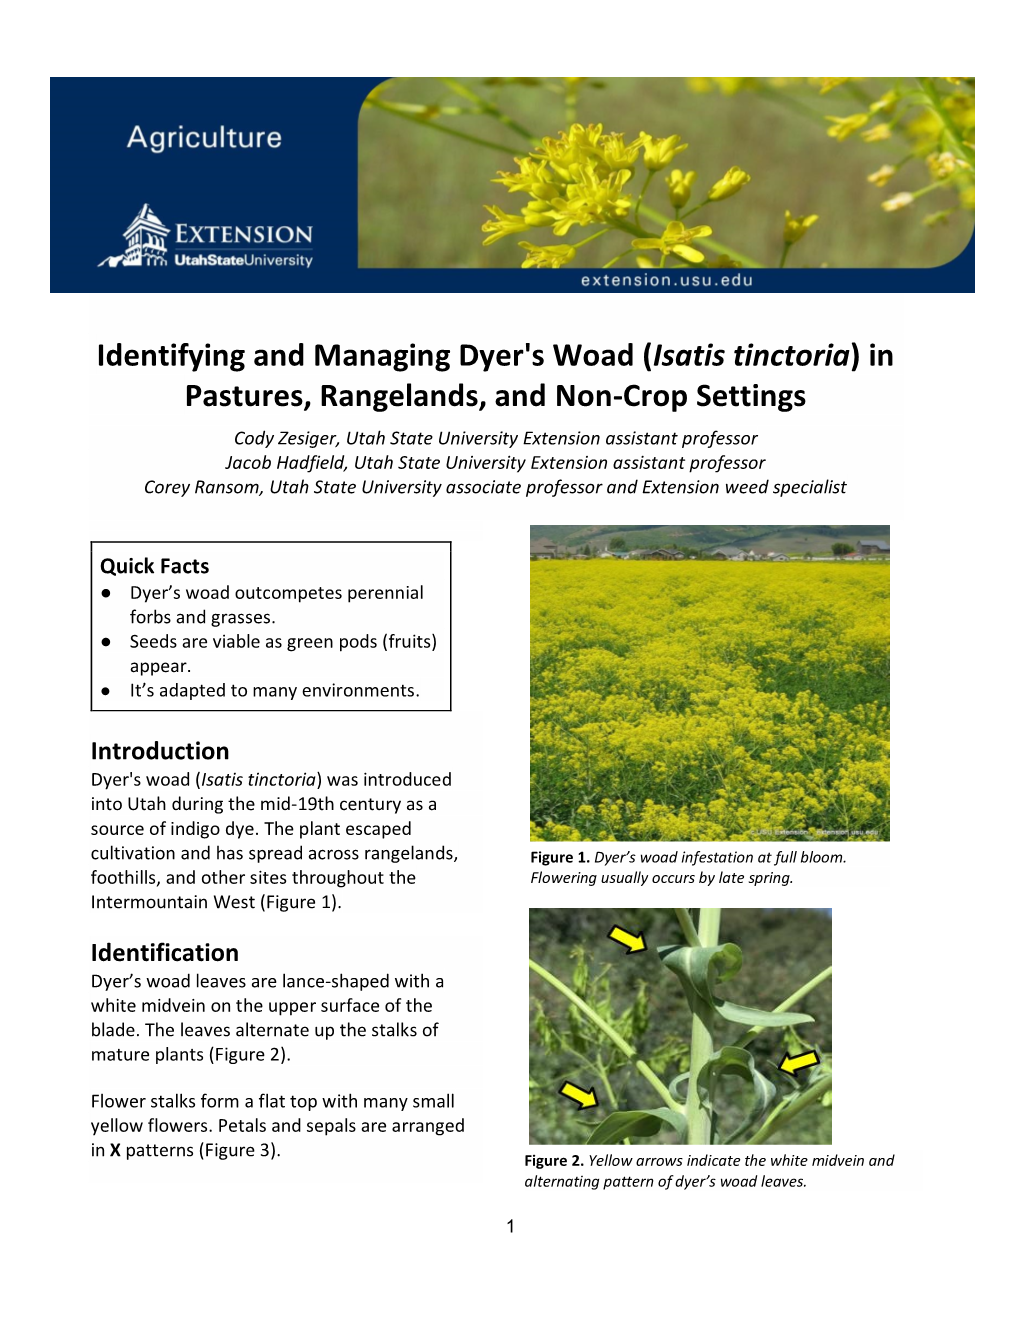 Identifying and Managing Dyer's Woad (Isatis Tinctoria) in Pastures, Rangelands, and Non-Crop Settings